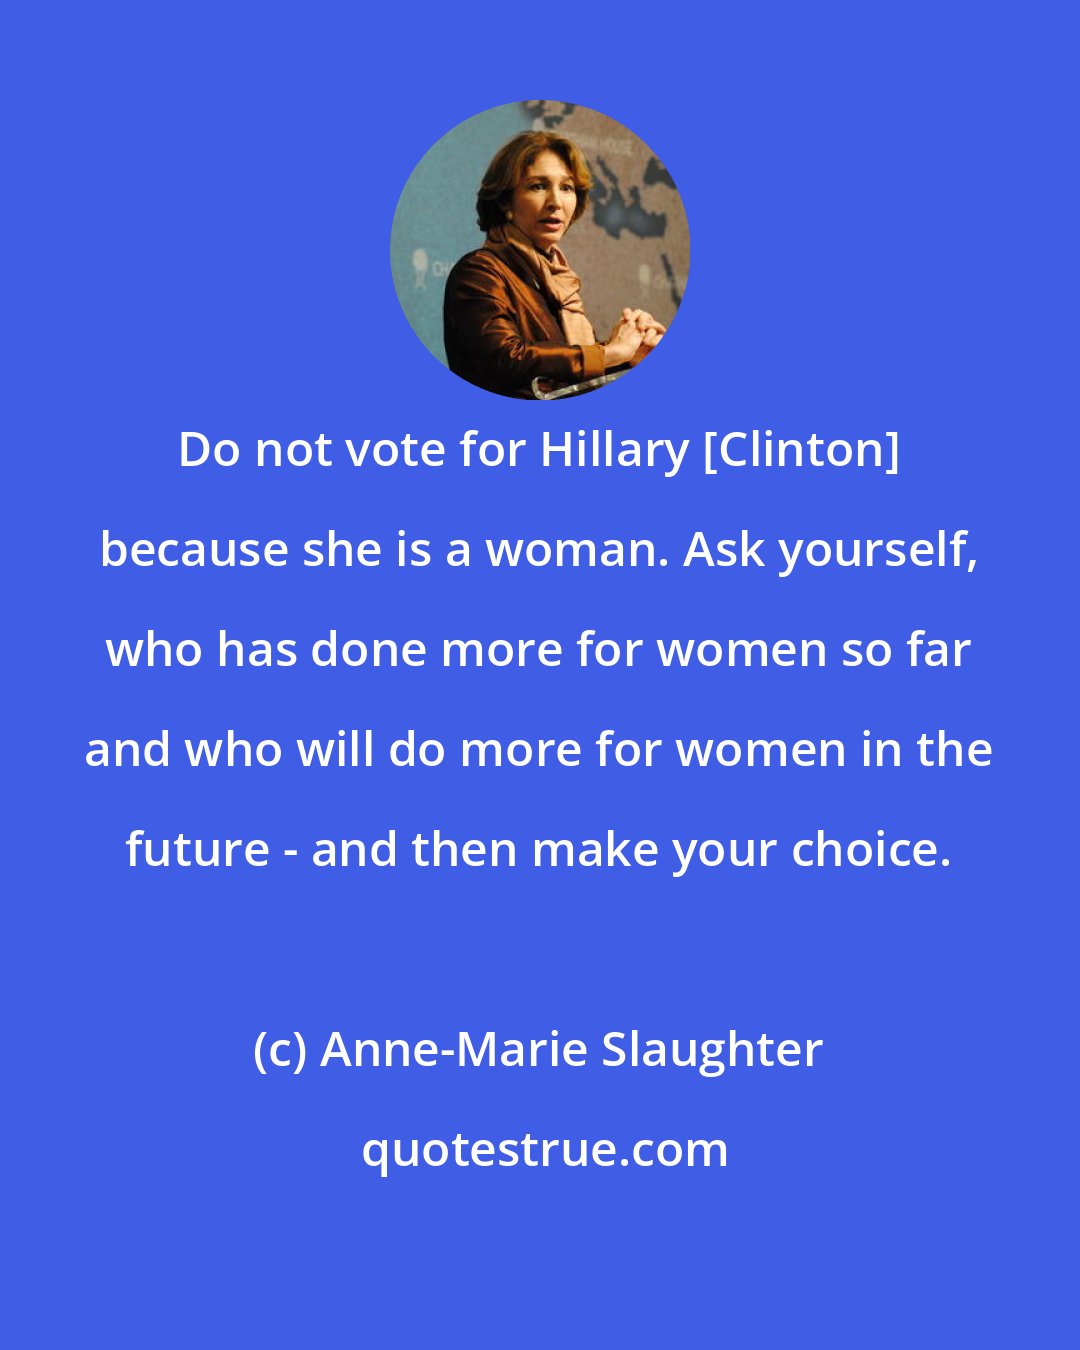 Anne-Marie Slaughter: Do not vote for Hillary [Clinton] because she is a woman. Ask yourself, who has done more for women so far and who will do more for women in the future - and then make your choice.